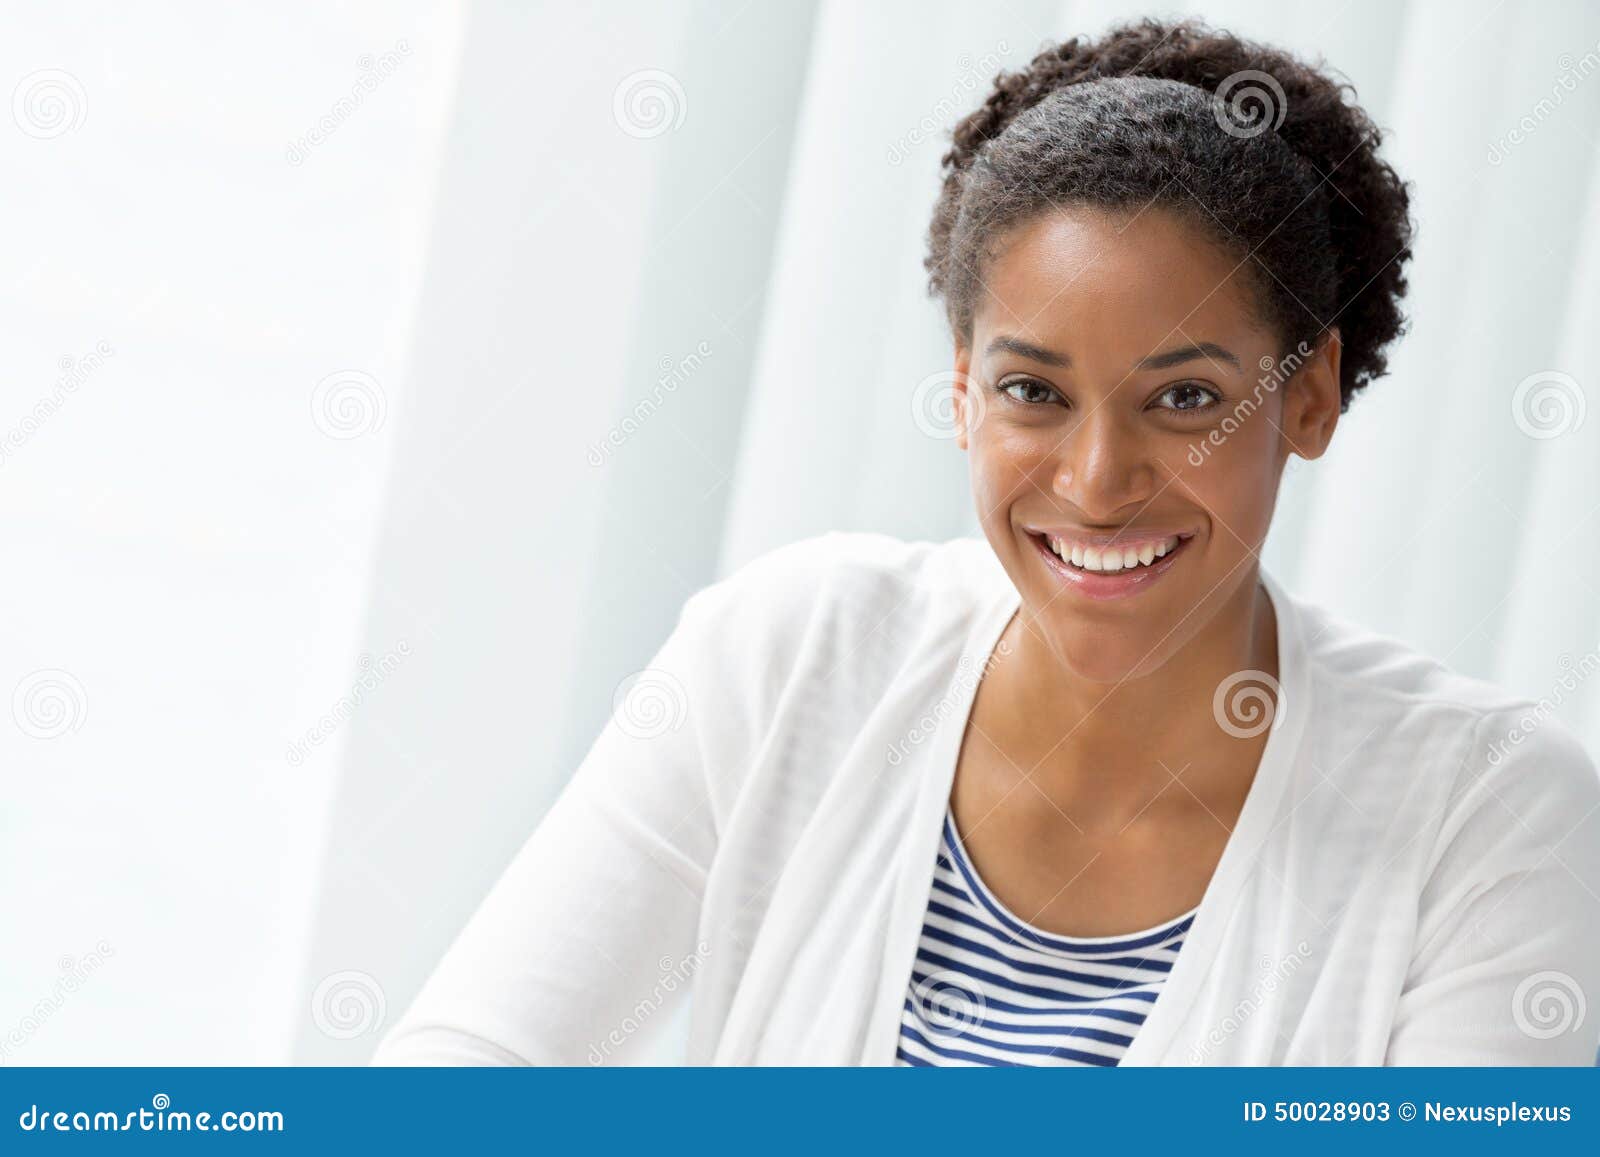 So happy to meet you stock image. Image of businesswoman - 50028903